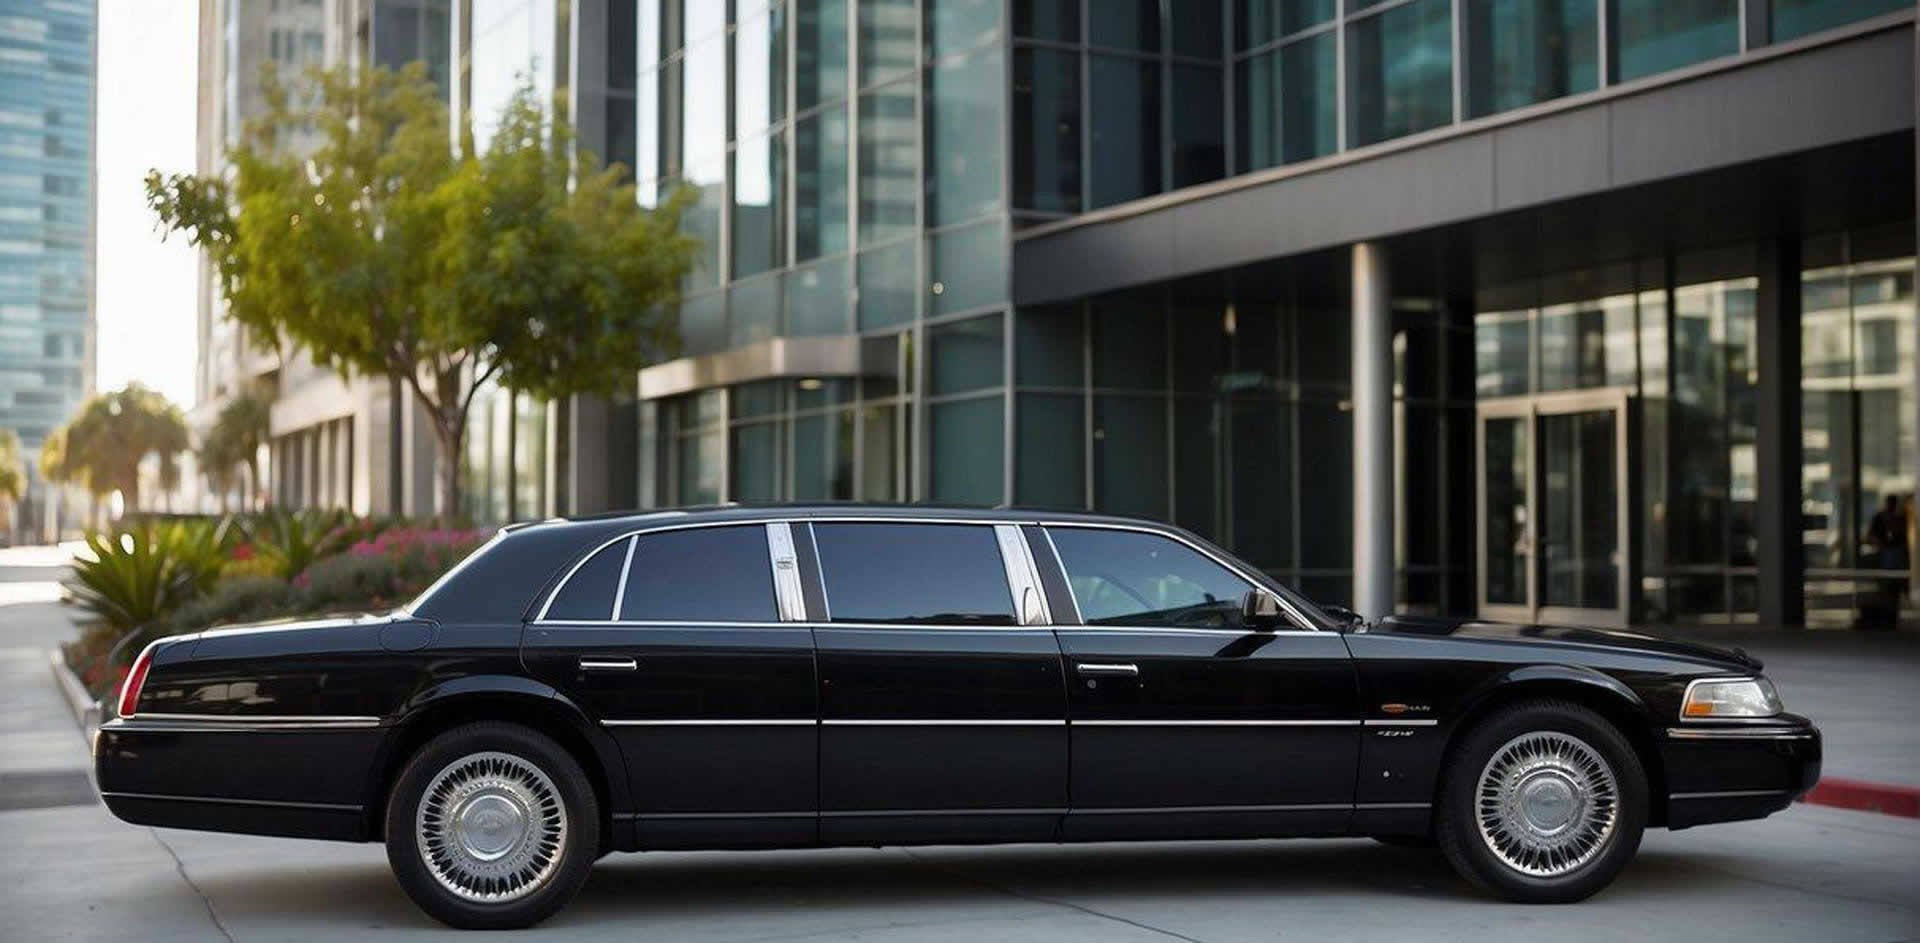 A sleek black limousine parked outside a modern office building in downtown San Diego, with a chauffeur standing by the open door ready to assist corporate clients